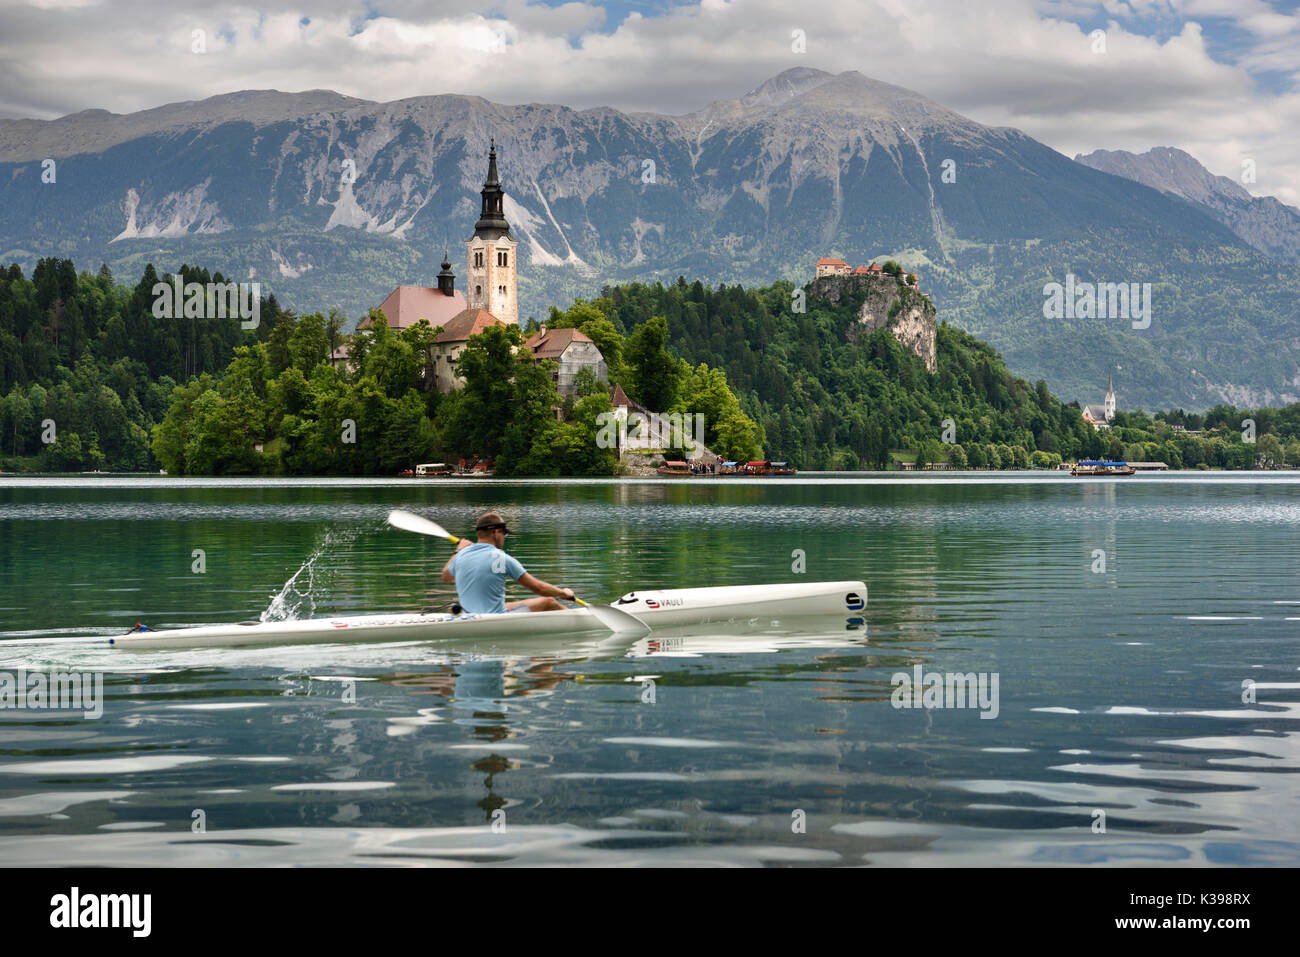 Assumption of Mary pilgrimage church Beld Island and kayaker on Lake Bled with Bled castle on cliff and Sol massive of Karavanke mountains Slovenia Stock Photo